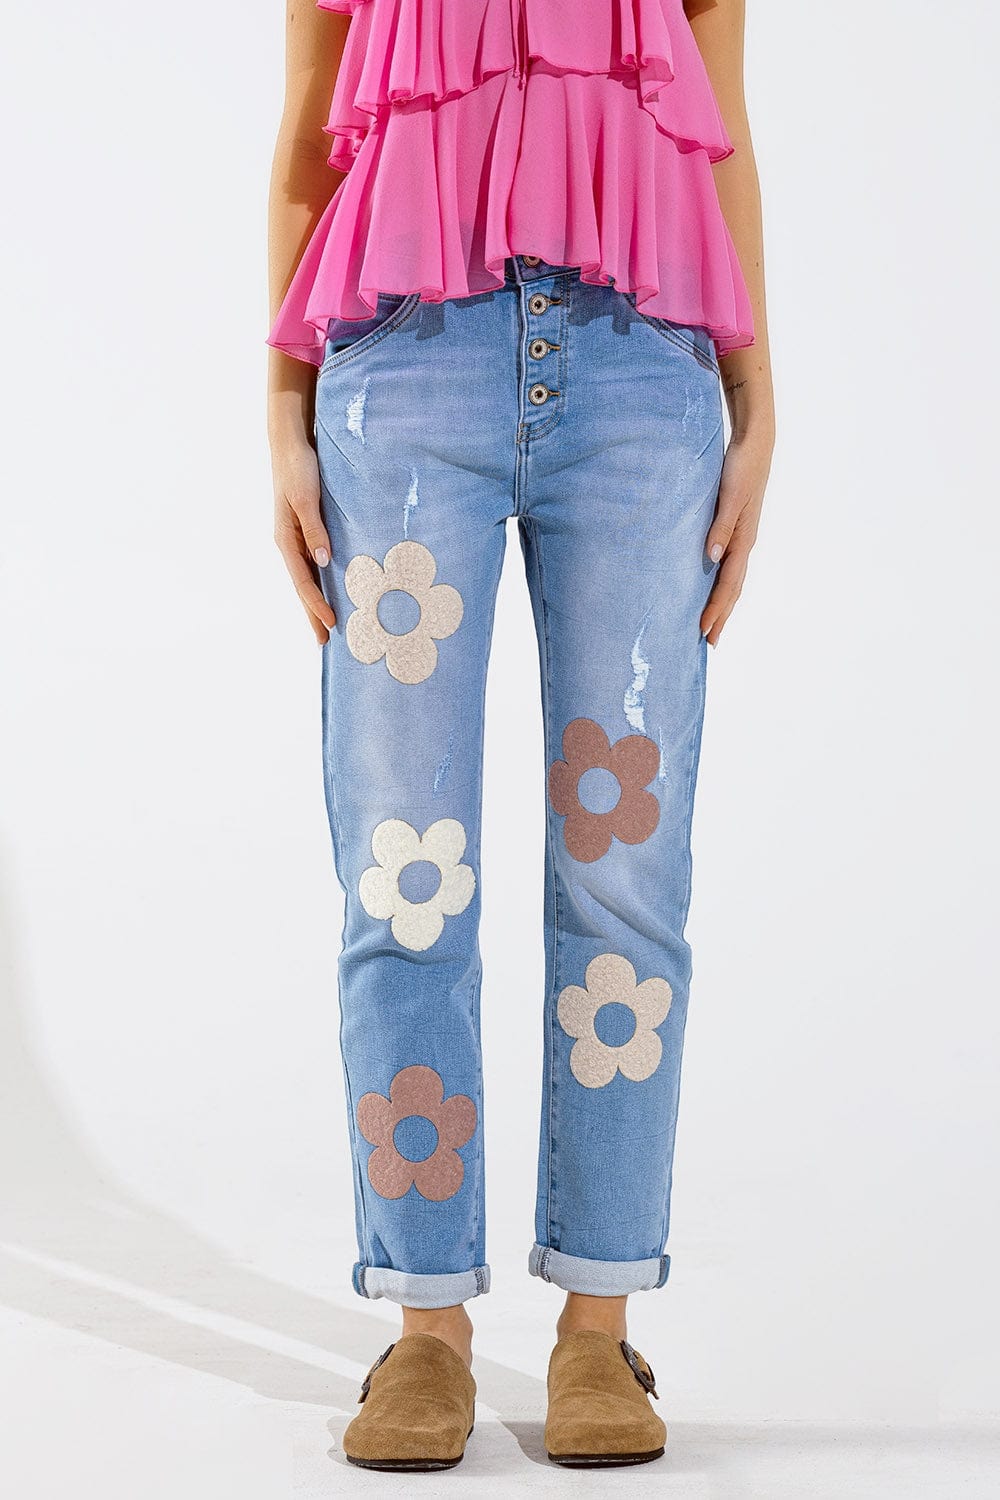 Q2 Women's Jean Straight Jeans With Button Closing And Flower Detail In Front